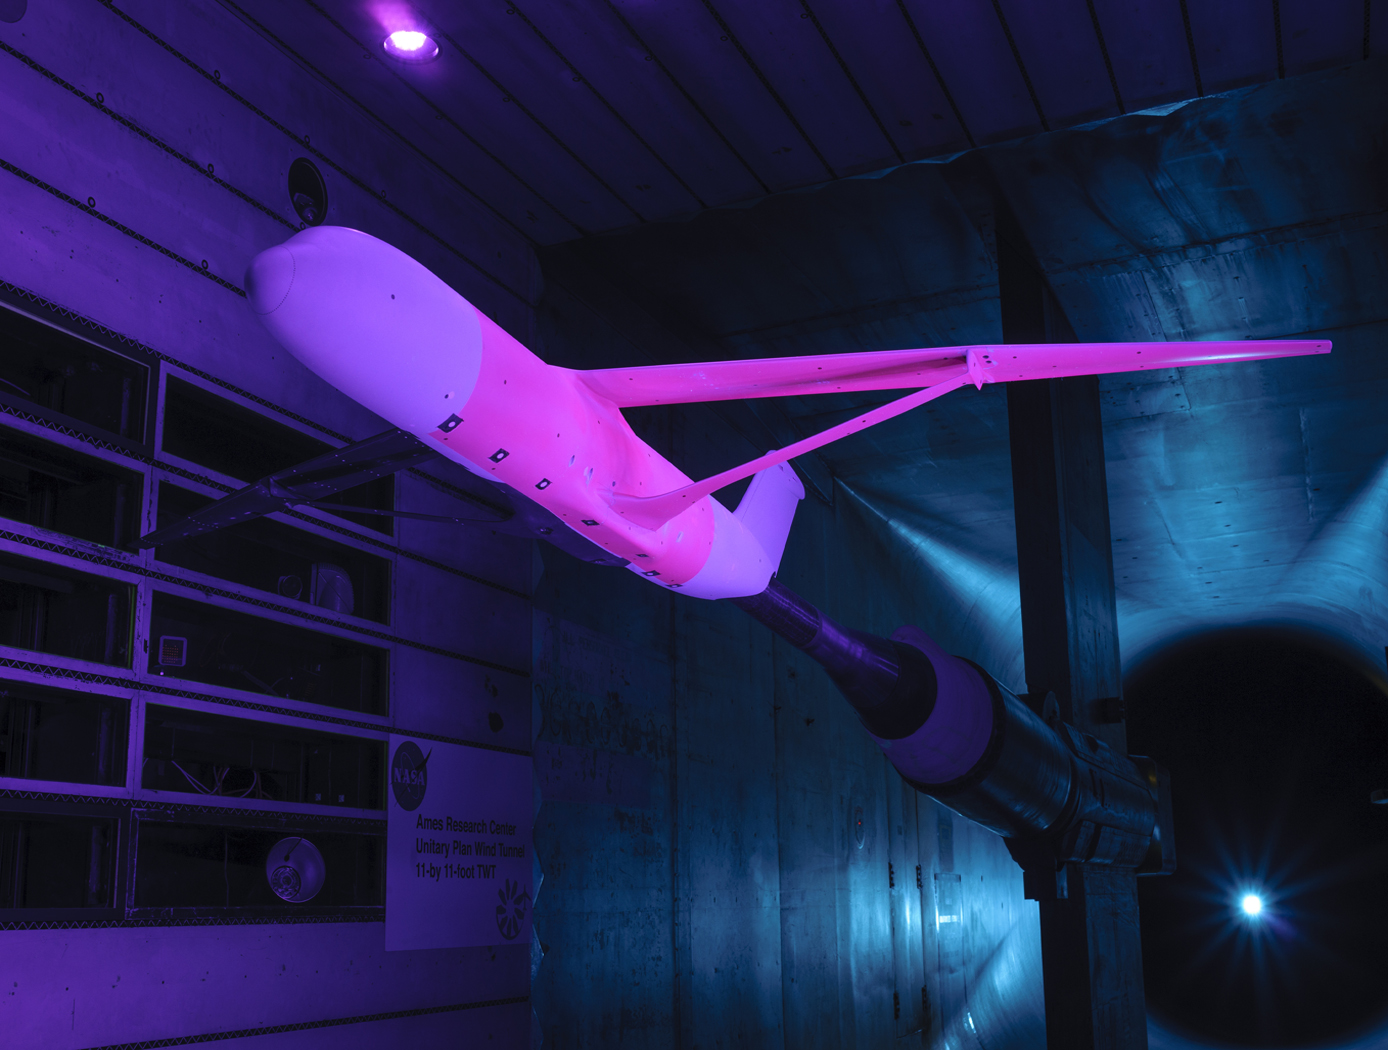 An aircraft design that could reduce fuel use, emissions and noise is set up for a test in a wind tunnel at NASA's Ames Research Center in California in which pink-colored pressure-sensitive paint is applied to the vehicle. The pink paint shines when exposed to blue light, glowing brighter or dimmer depending on air pressure in the area.